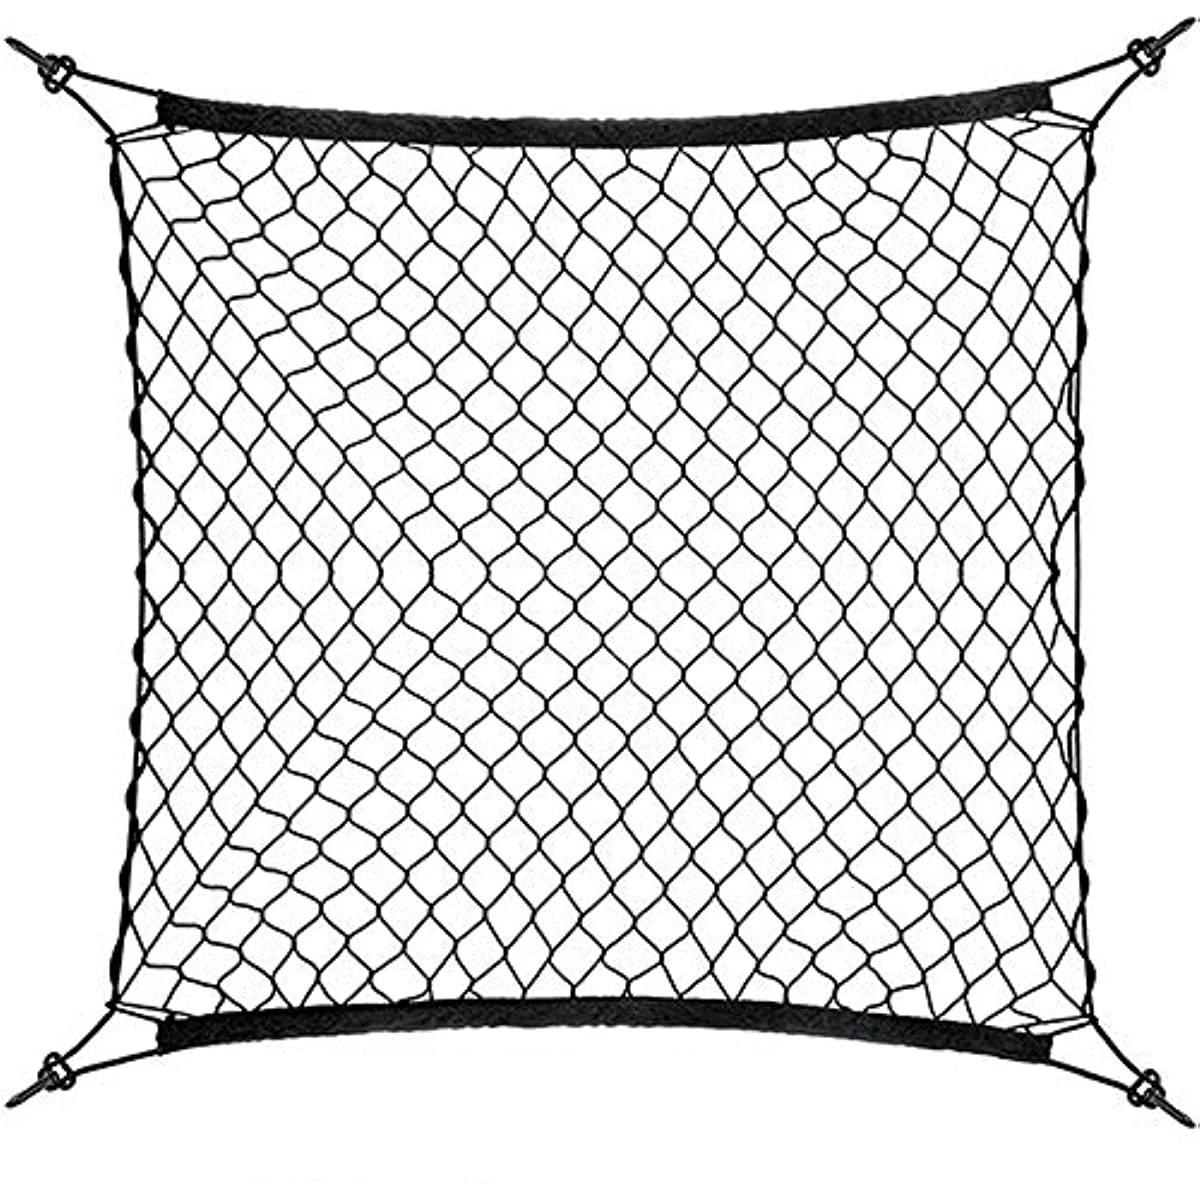 4 HooK Car Trunk Cargo Mesh Net Luggage For Volvo S40 S60 S70 S80 S90 V4... - $14.64